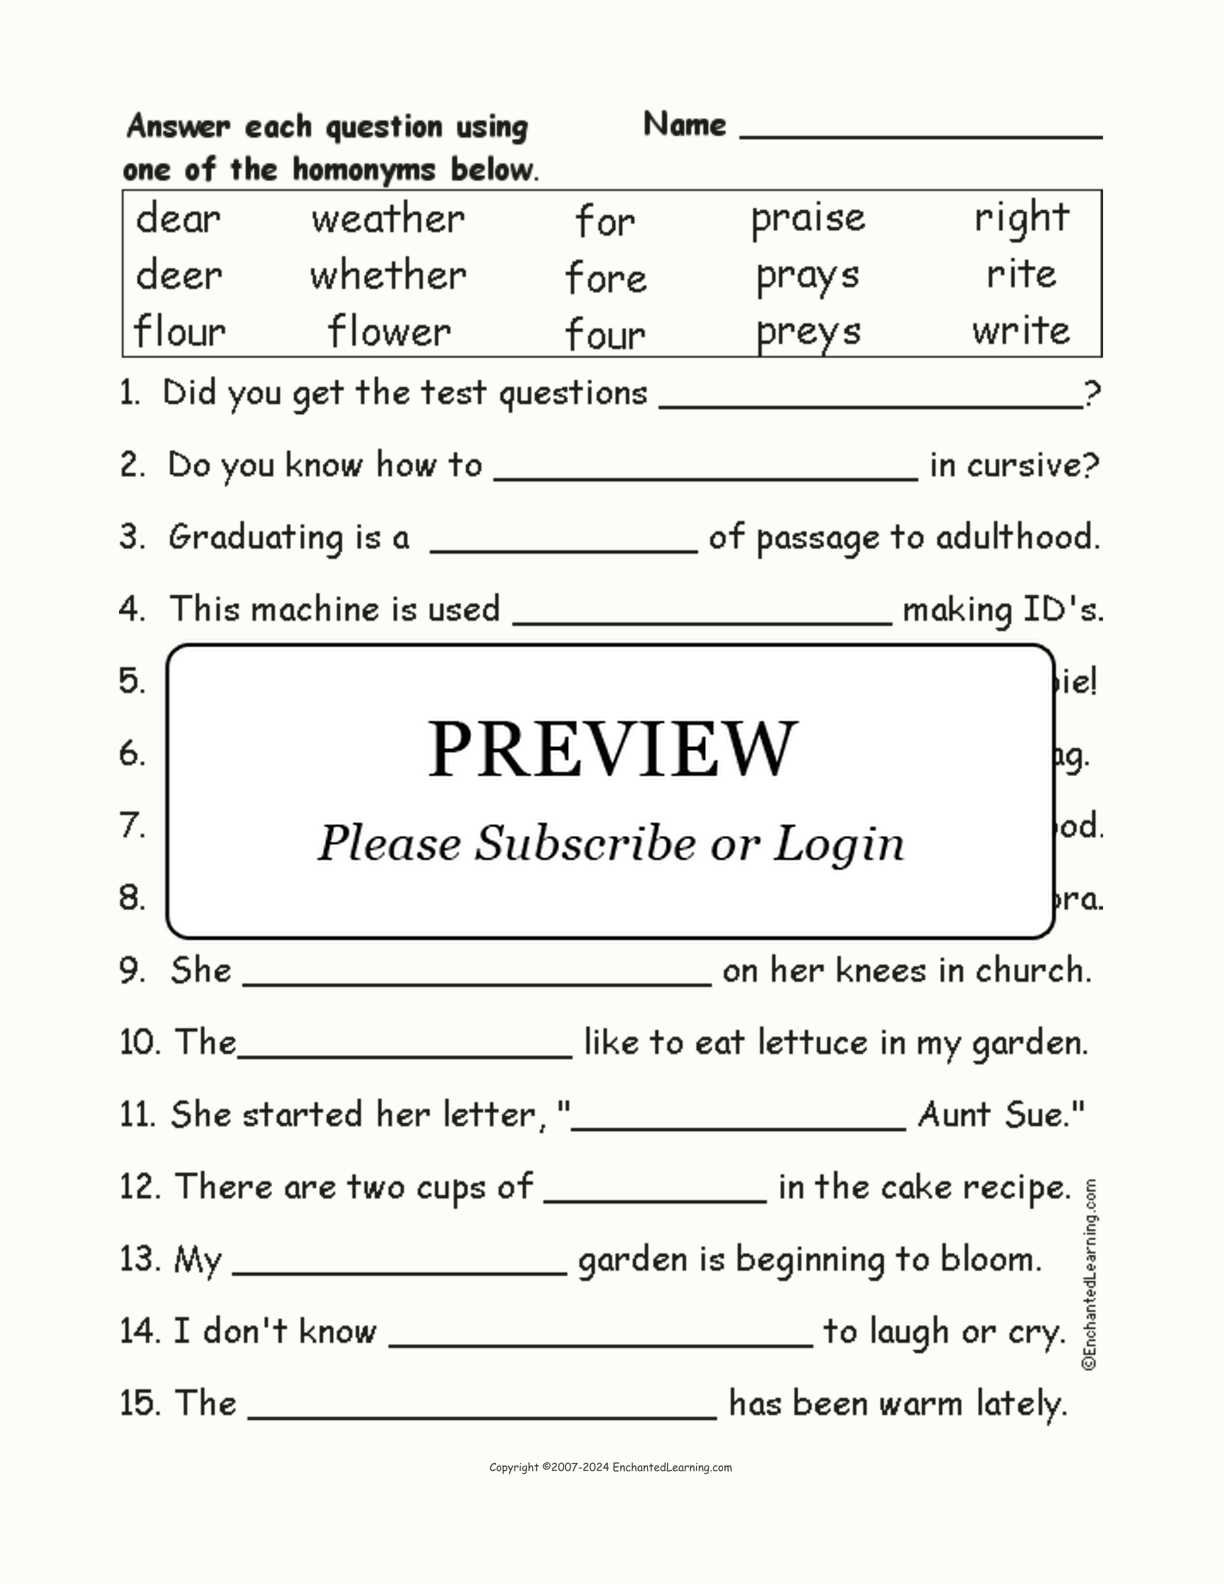 Homonyms Spelling Word Questions #4 interactive worksheet page 1